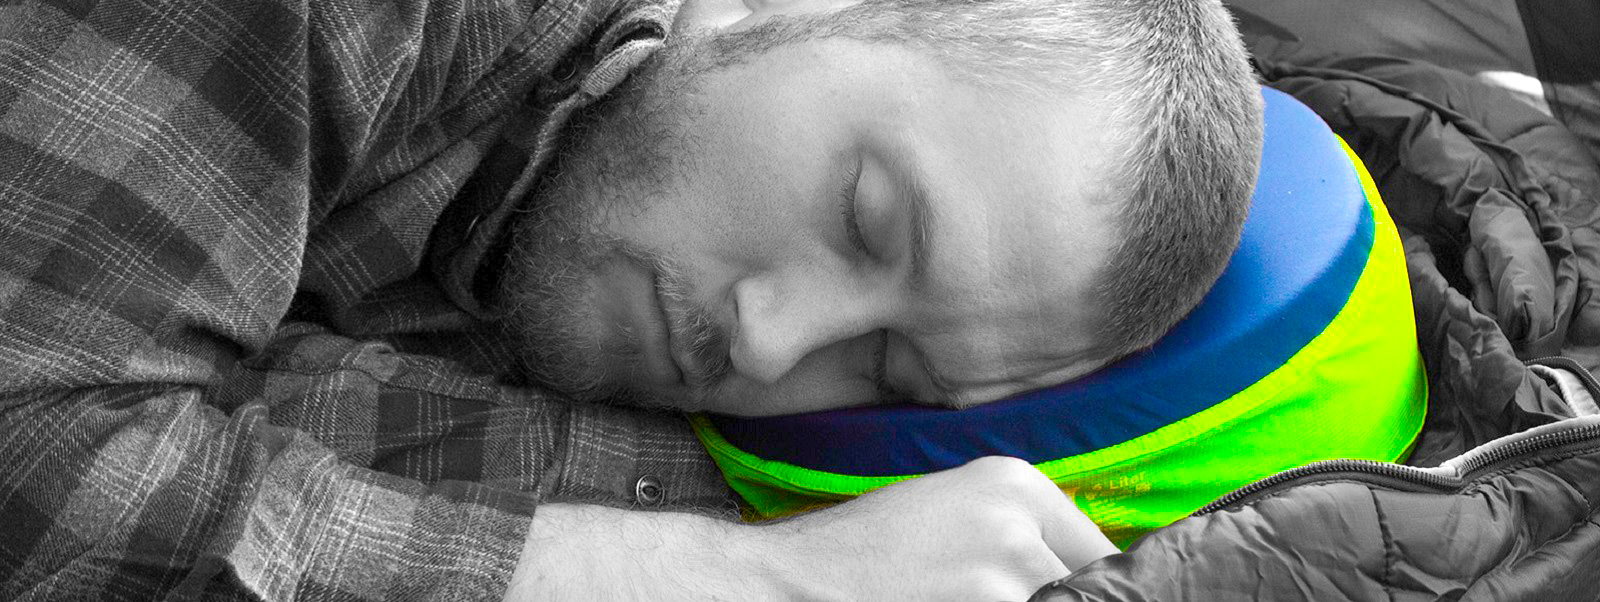 PackPillow is the world's first multifunctional travel pillow